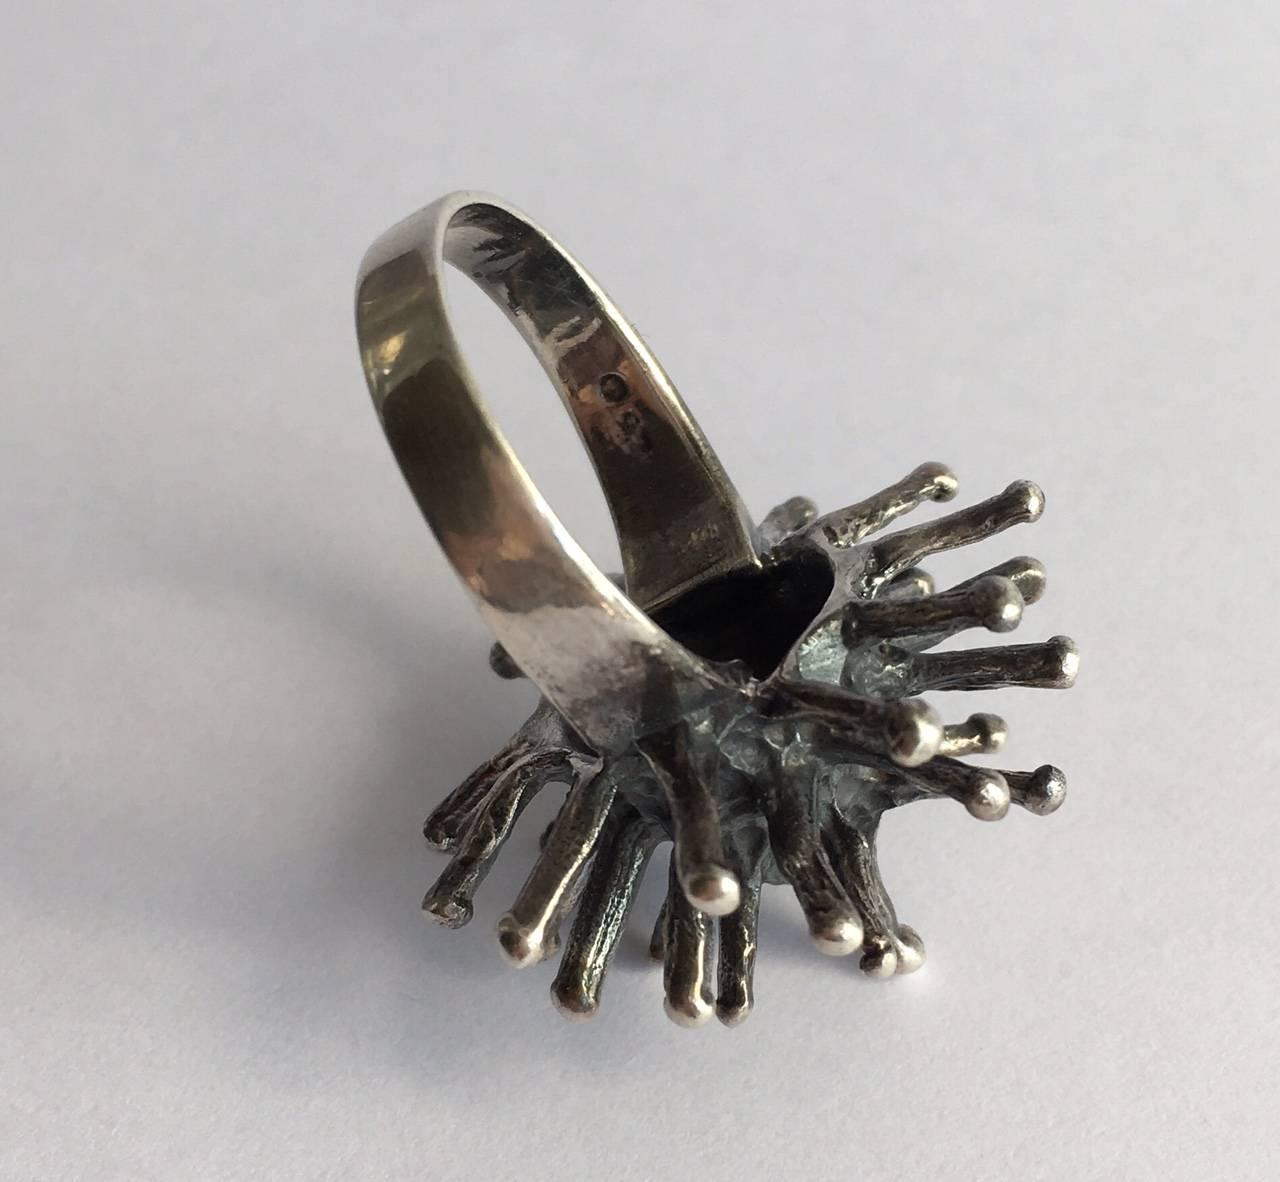 Women's or Men's Vintage Jewelry Silver Flower Rings Abstract Starburst Sculpture Architectural